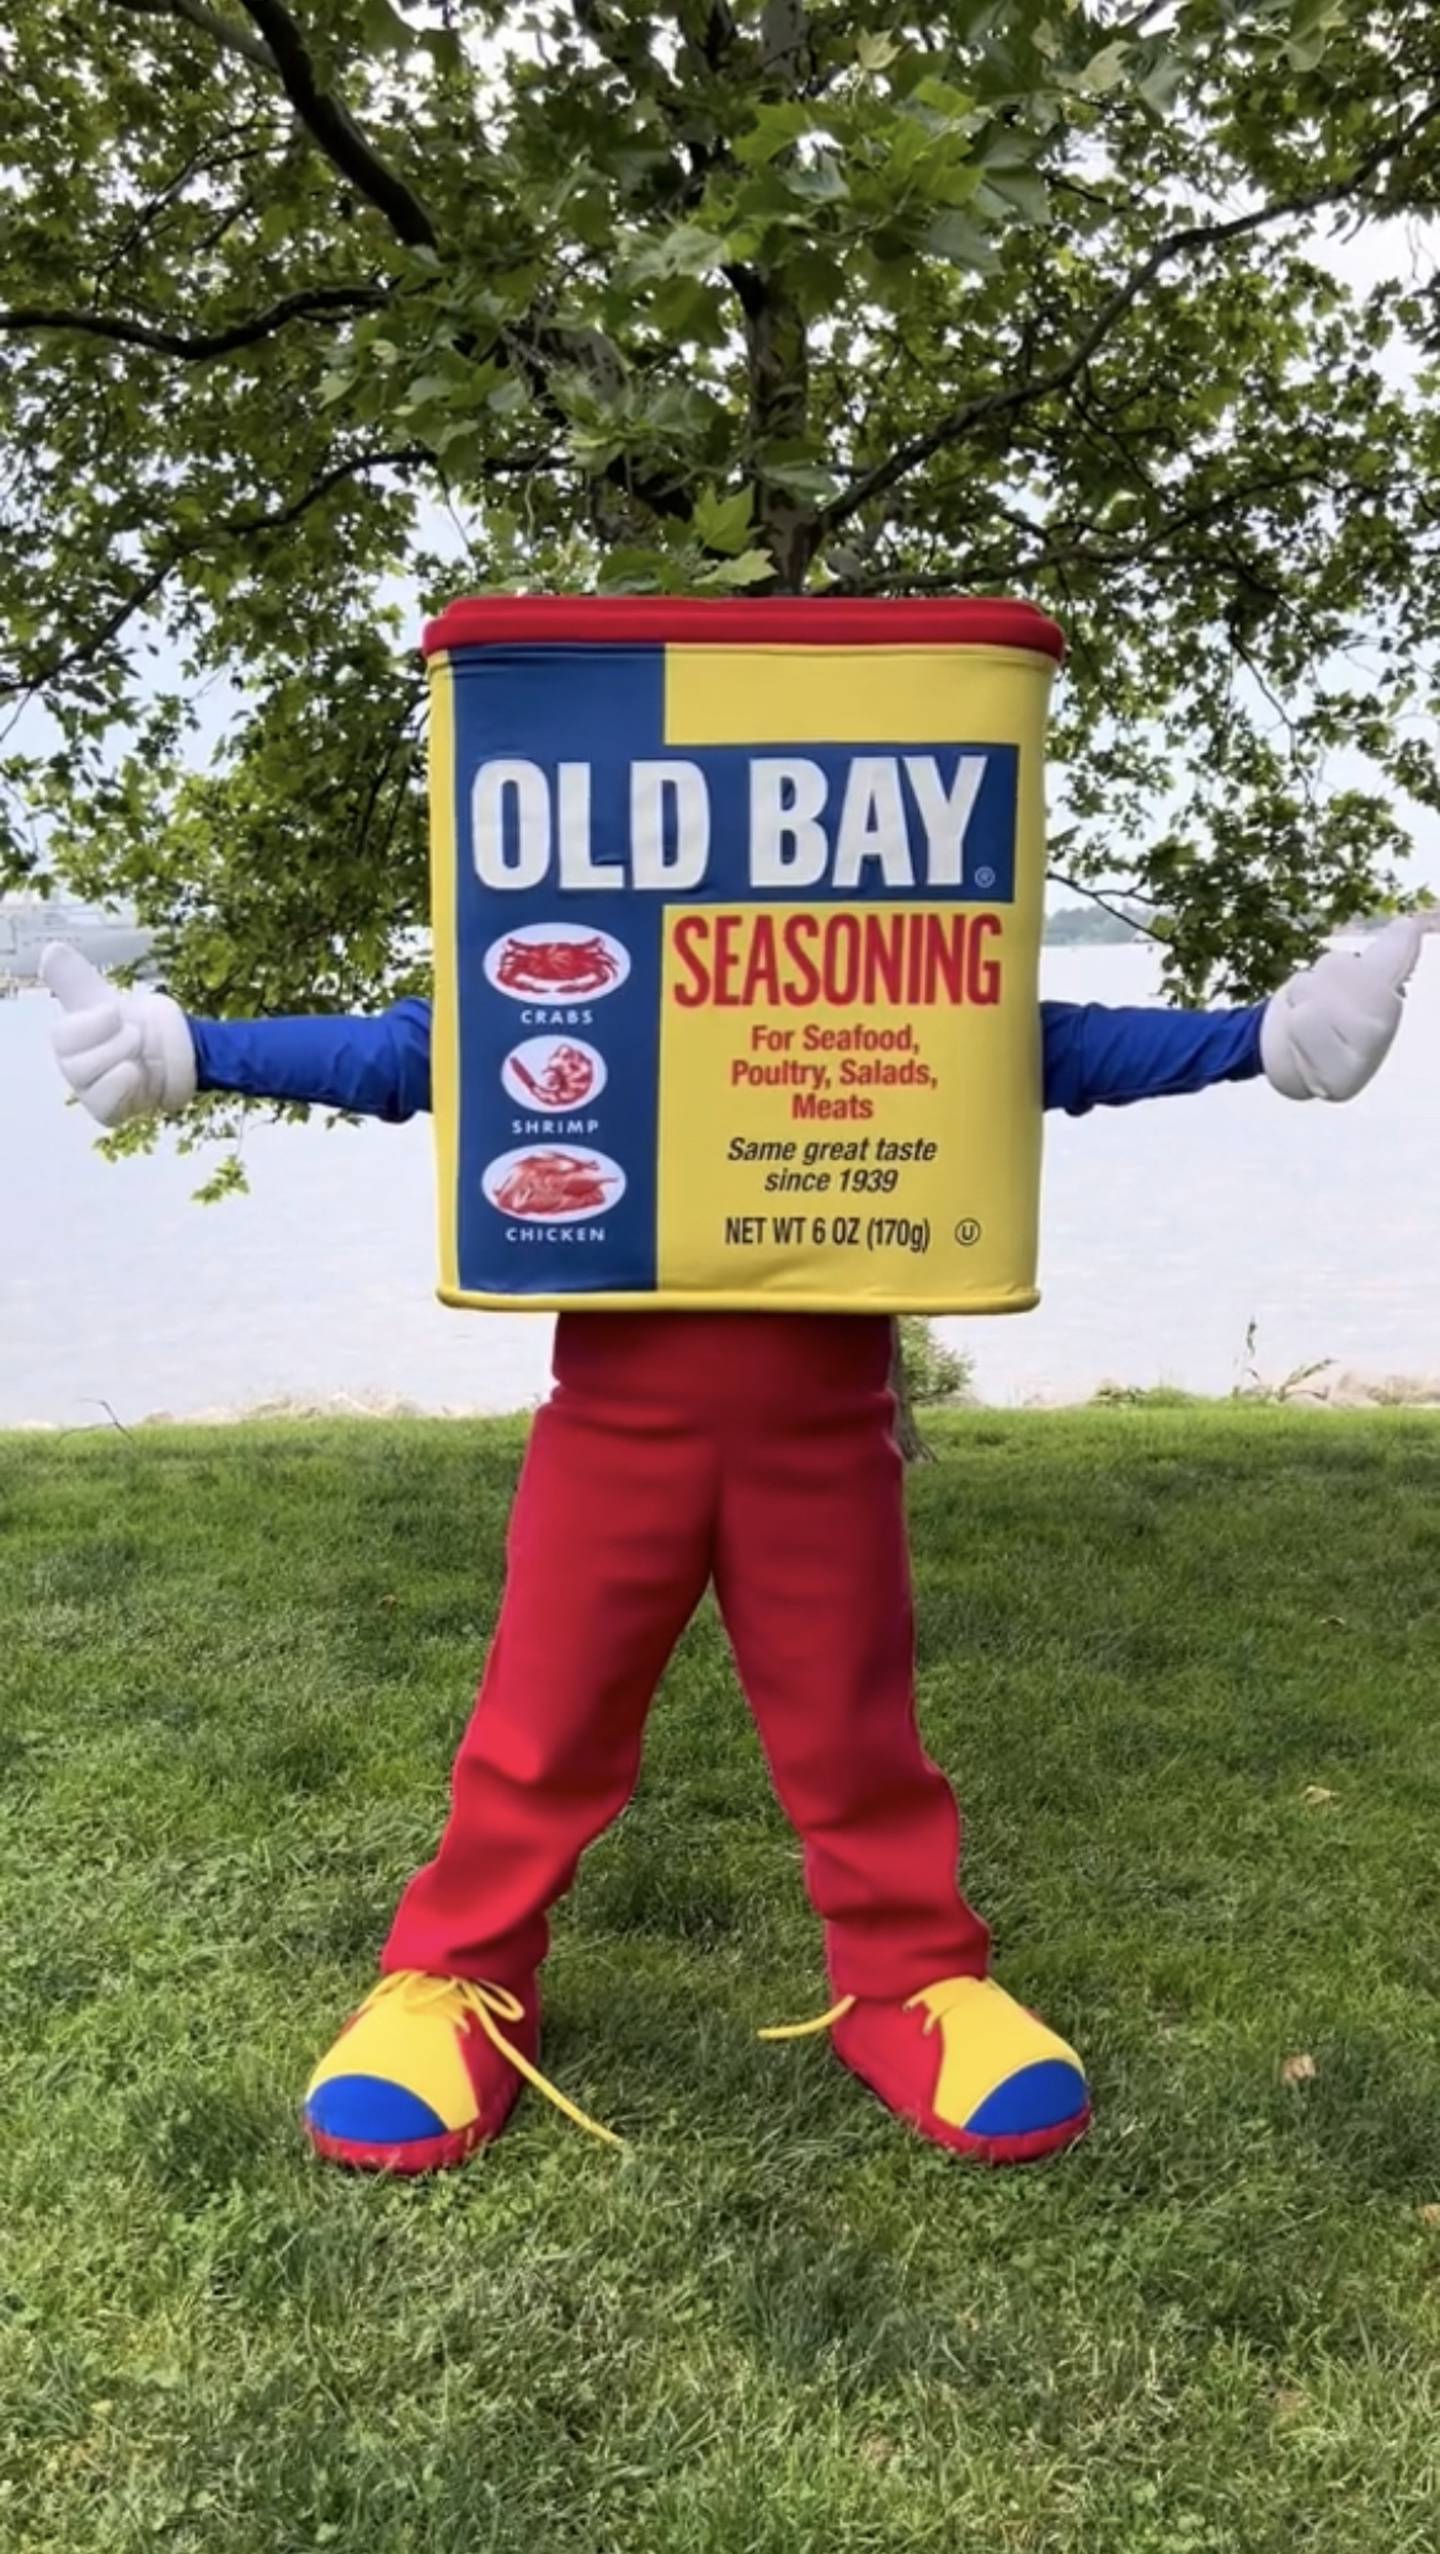 Old Bay seasoning has its own TikTok account, because of course it does. A recurring star is this mascot.